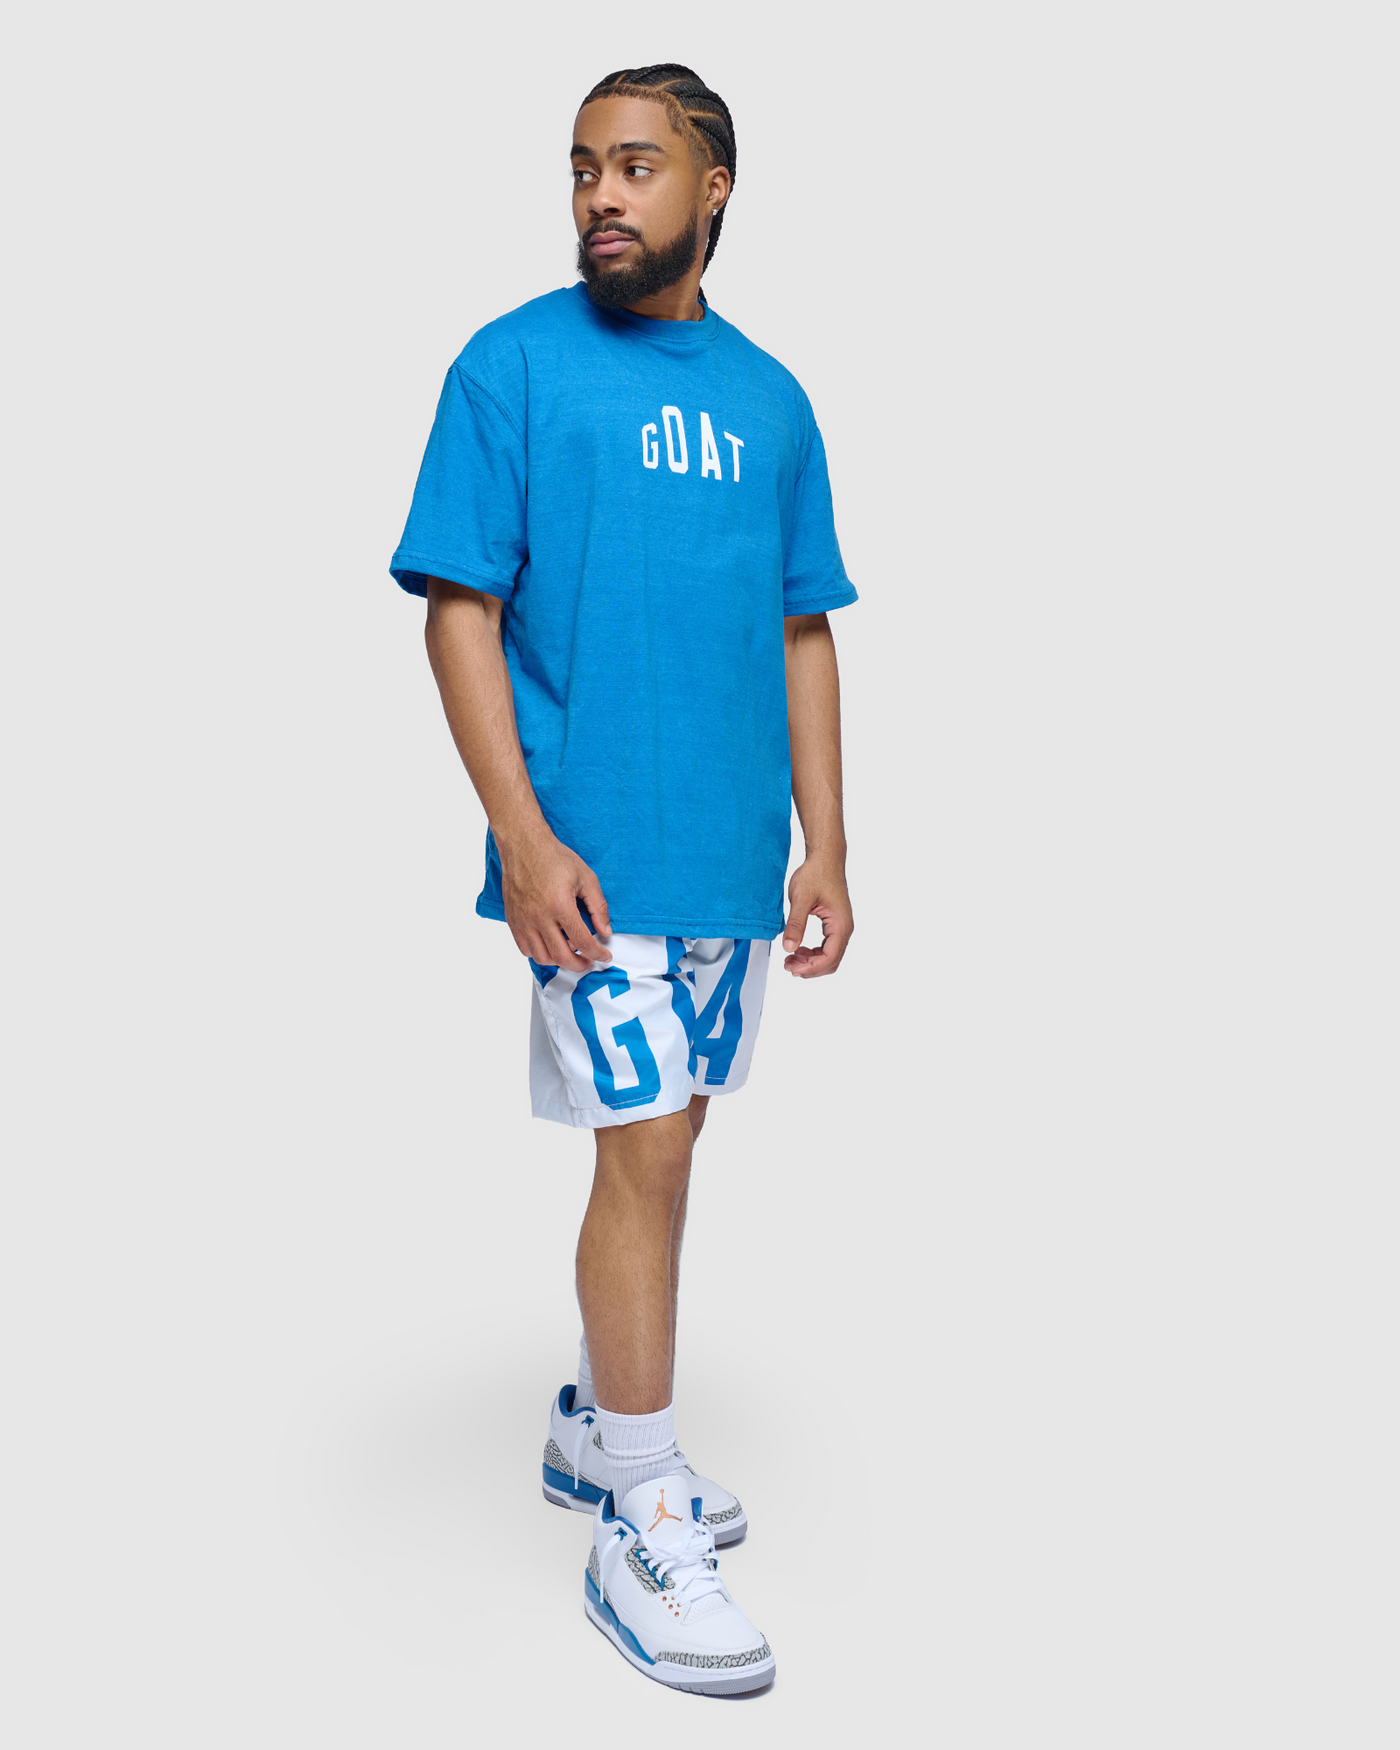 GOAT Big Arch Tee (Wizards Blue)